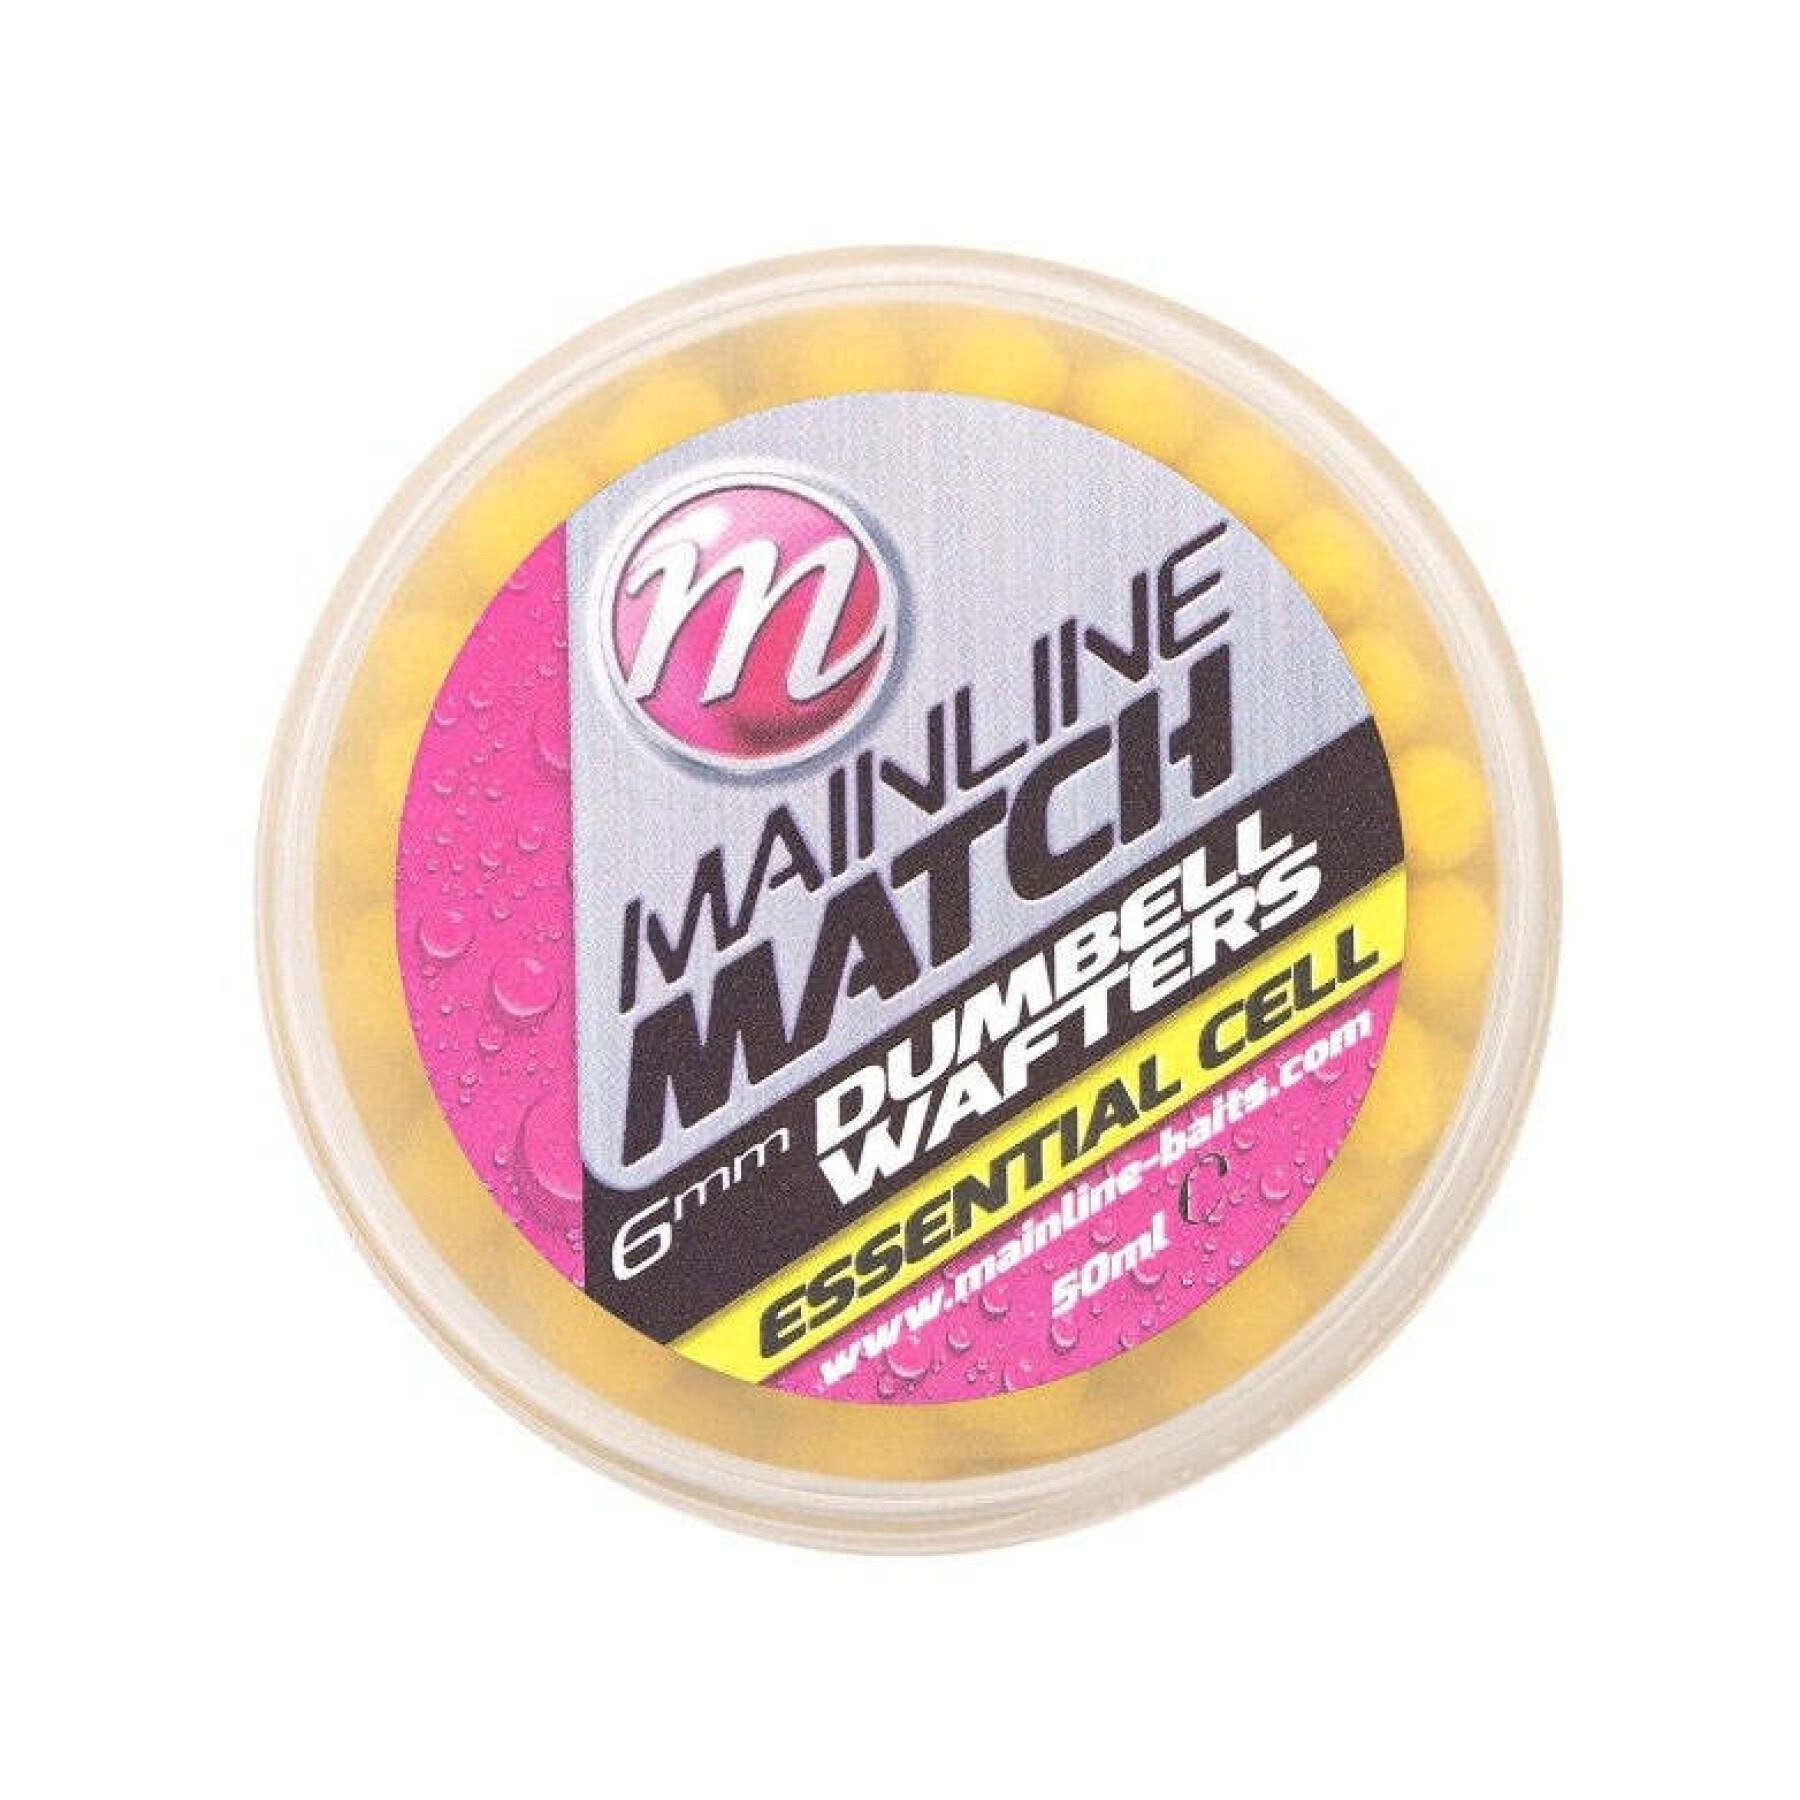 Gancho Mainline Match Dumbell Wafters